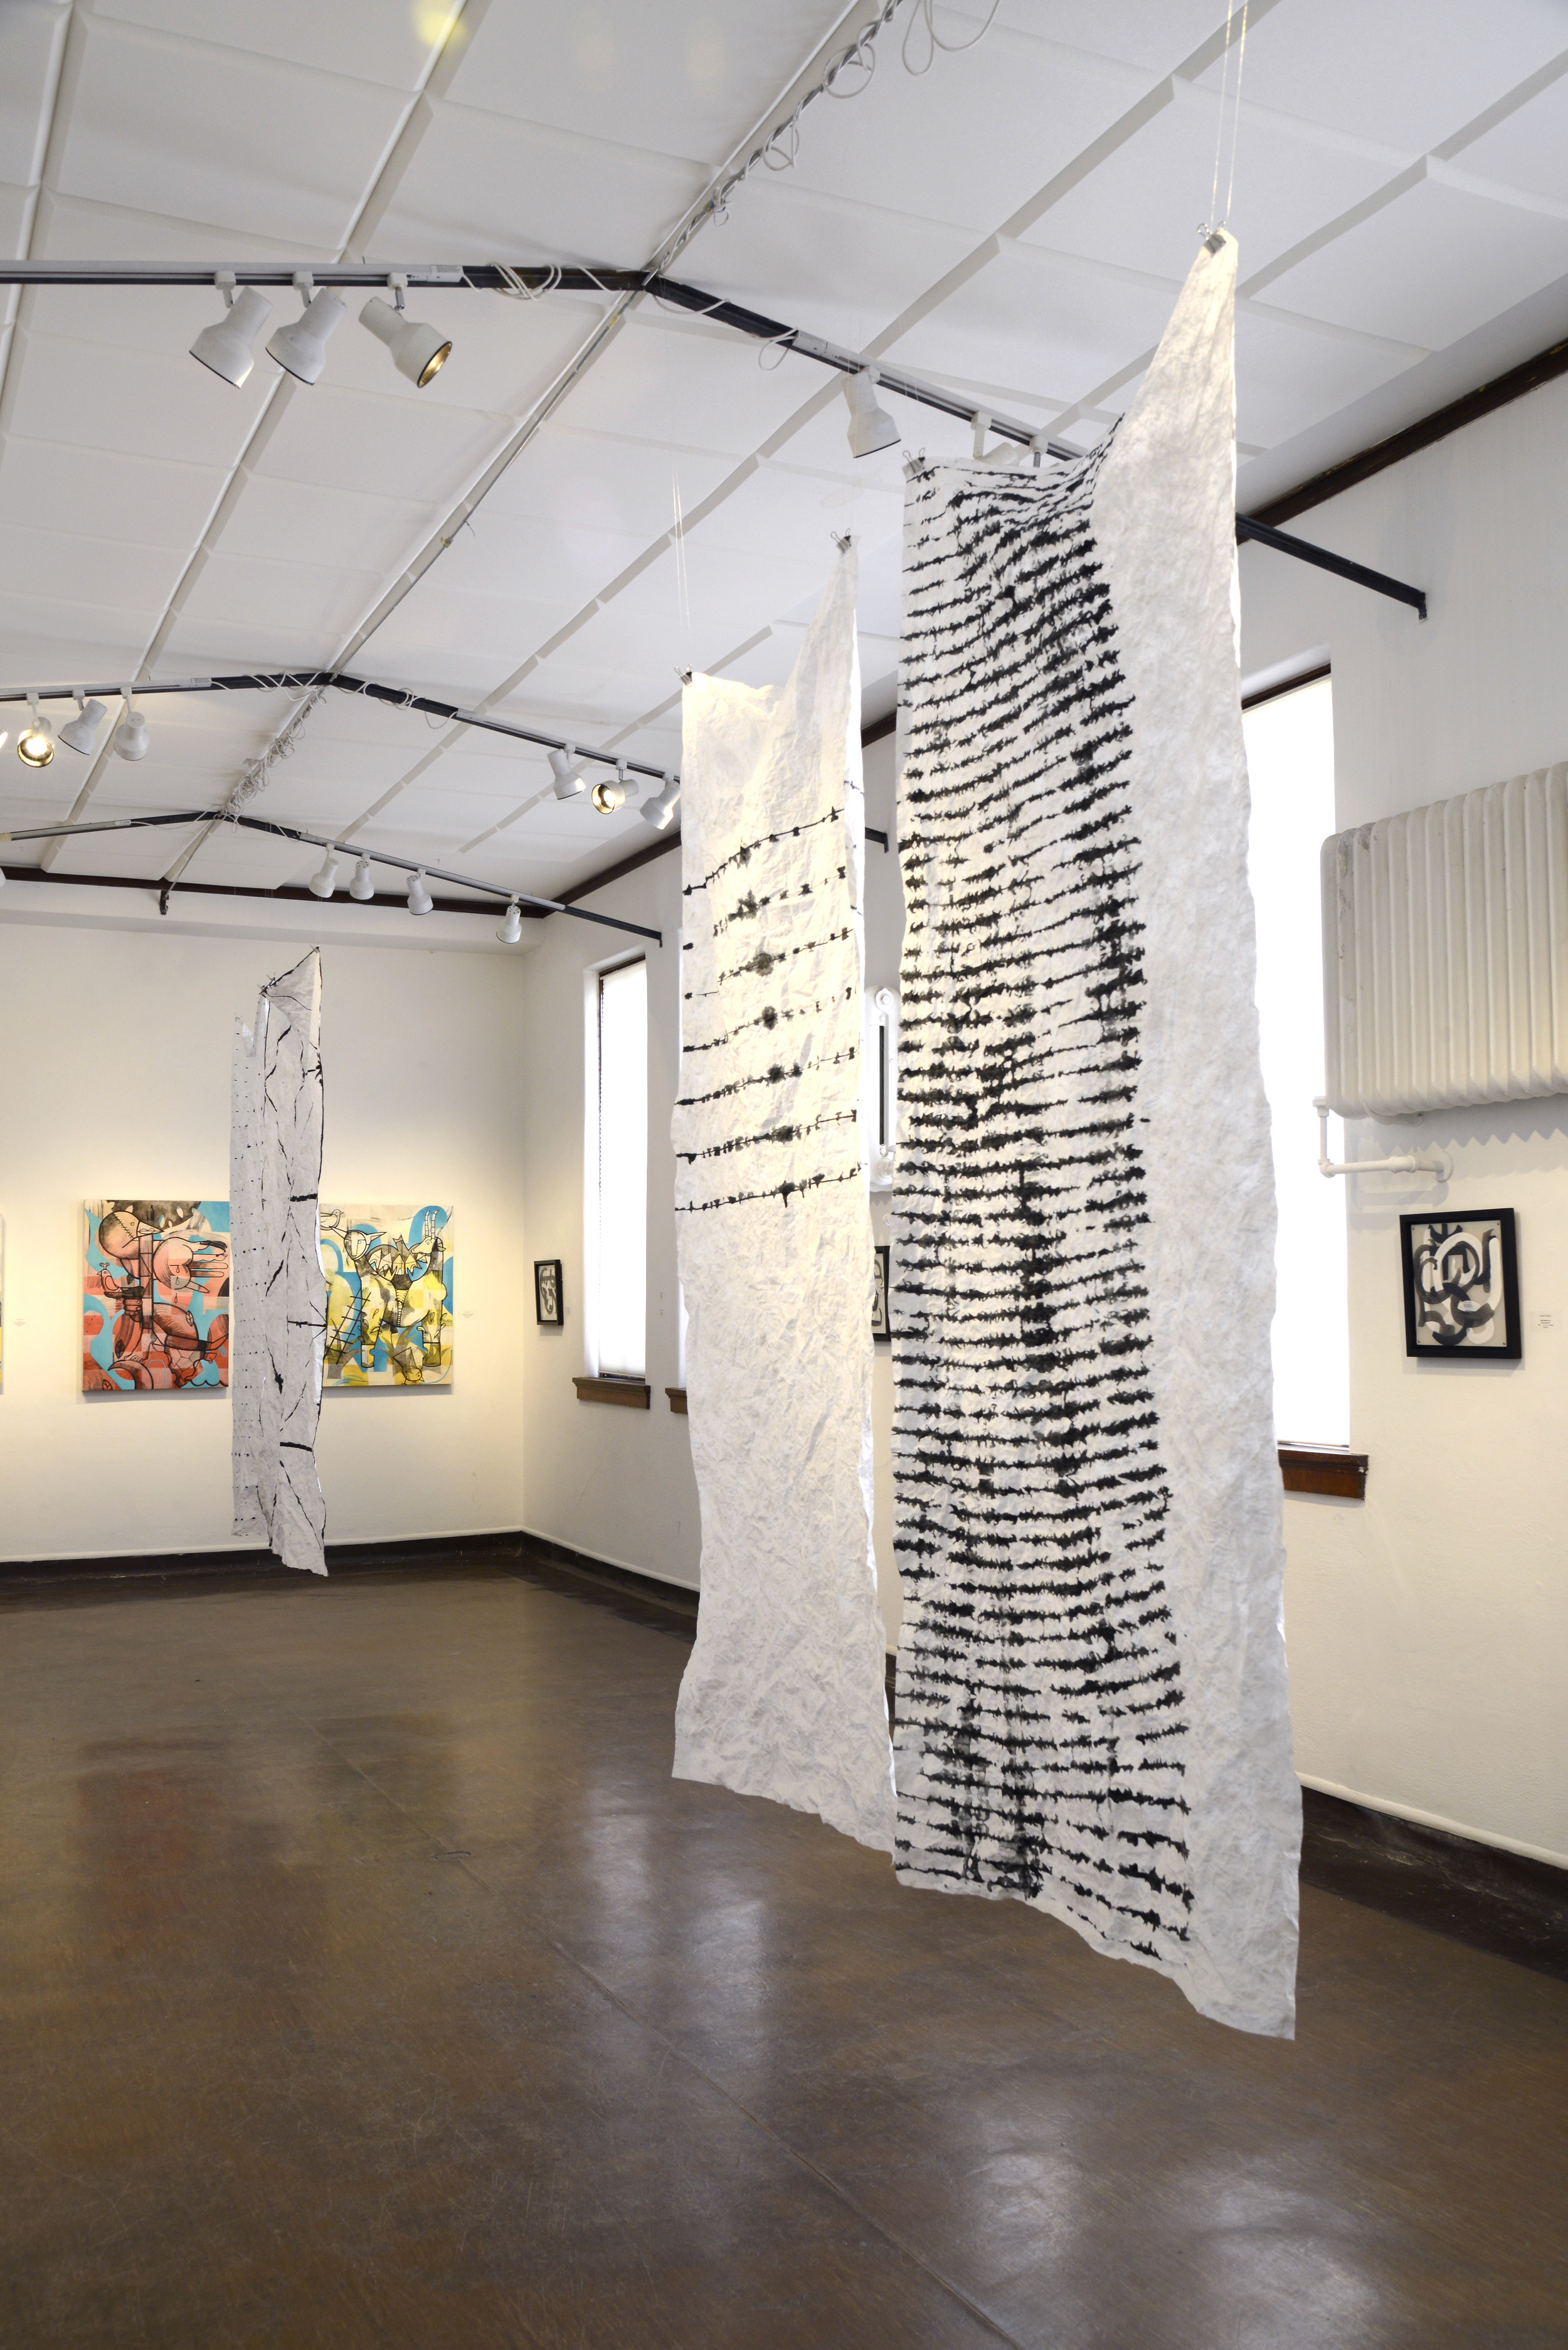  Installed in "Finding Reason", April 2014 The Harwood Art Center, Albuquerque, New Mexico 